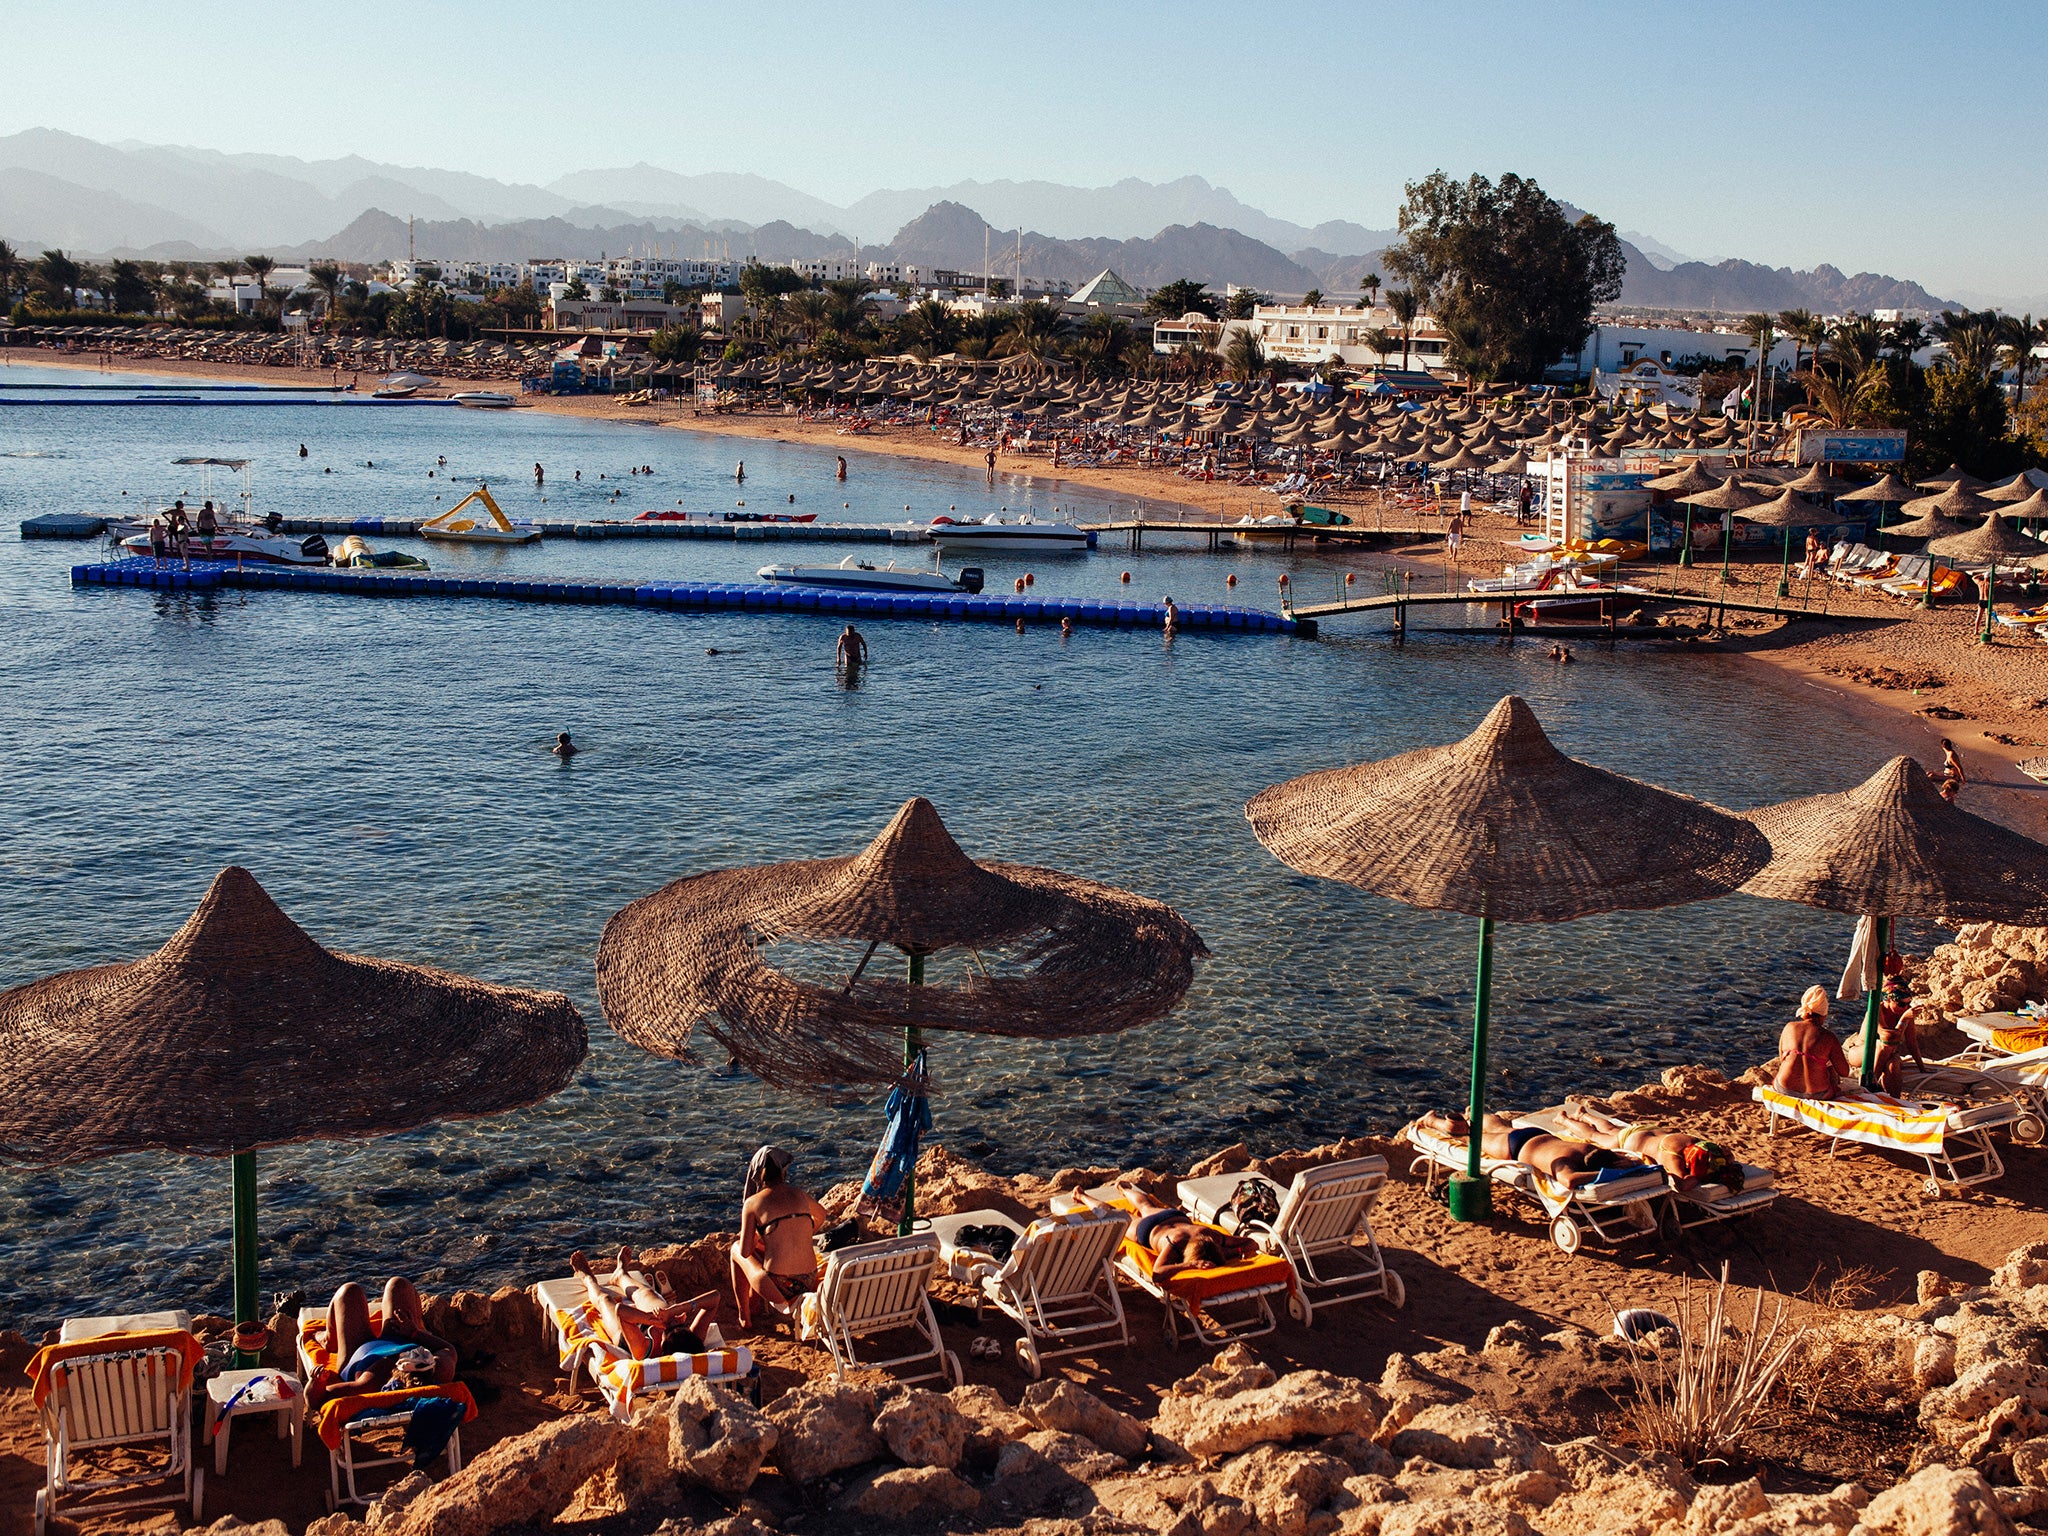 Thomas Cook has been offering holidays to Sharm since 1859